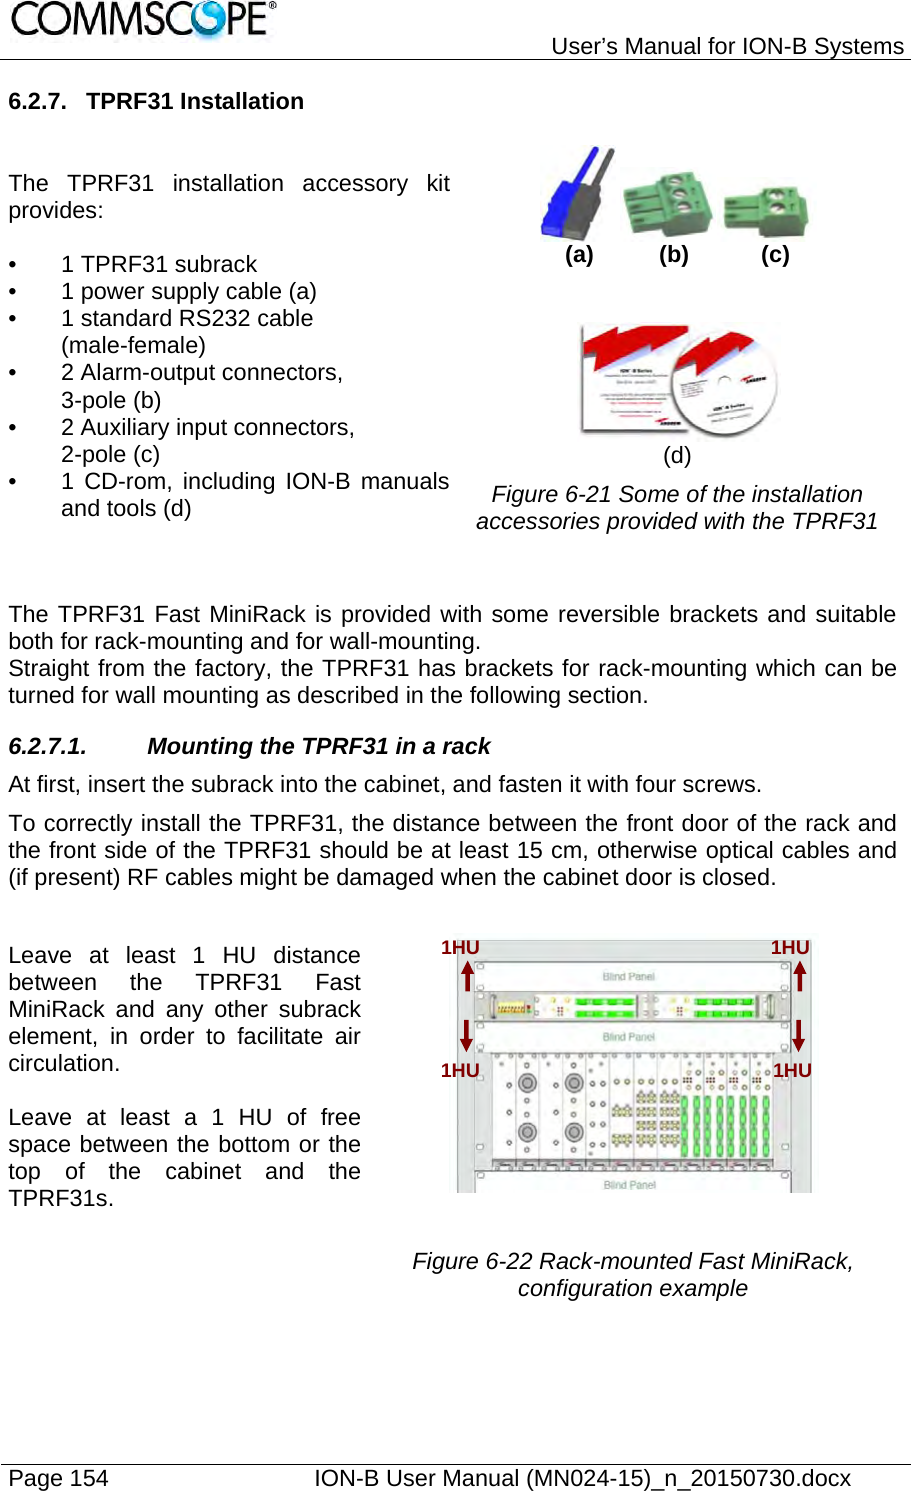   User’s Manual for ION-B Systems Page 154    ION-B User Manual (MN024-15)_n_20150730.docx  6.2.7. TPRF31 Installation  The TPRF31 installation accessory kit provides:  •  1 TPRF31 subrack  •  1 power supply cable (a) •  1 standard RS232 cable  (male-female) • 2 Alarm-output connectors,  3-pole (b) •  2 Auxiliary input connectors,  2-pole (c) •  1 CD-rom, including ION-B manuals and tools (d)  (a)          (b)           (c)    (d) Figure 6-21 Some of the installation accessories provided with the TPRF31  The TPRF31 Fast MiniRack is provided with some reversible brackets and suitable both for rack-mounting and for wall-mounting. Straight from the factory, the TPRF31 has brackets for rack-mounting which can be turned for wall mounting as described in the following section. 6.2.7.1.  Mounting the TPRF31 in a rack At first, insert the subrack into the cabinet, and fasten it with four screws. To correctly install the TPRF31, the distance between the front door of the rack and the front side of the TPRF31 should be at least 15 cm, otherwise optical cables and (if present) RF cables might be damaged when the cabinet door is closed.  Leave at least 1 HU distance between the TPRF31 Fast MiniRack and any other subrack element, in order to facilitate air circulation.  Leave at least a 1 HU of free space between the bottom or the top of the cabinet and the TPRF31s.     Figure 6-22 Rack-mounted Fast MiniRack, configuration example  1HU 1HU 1HU 1HU 